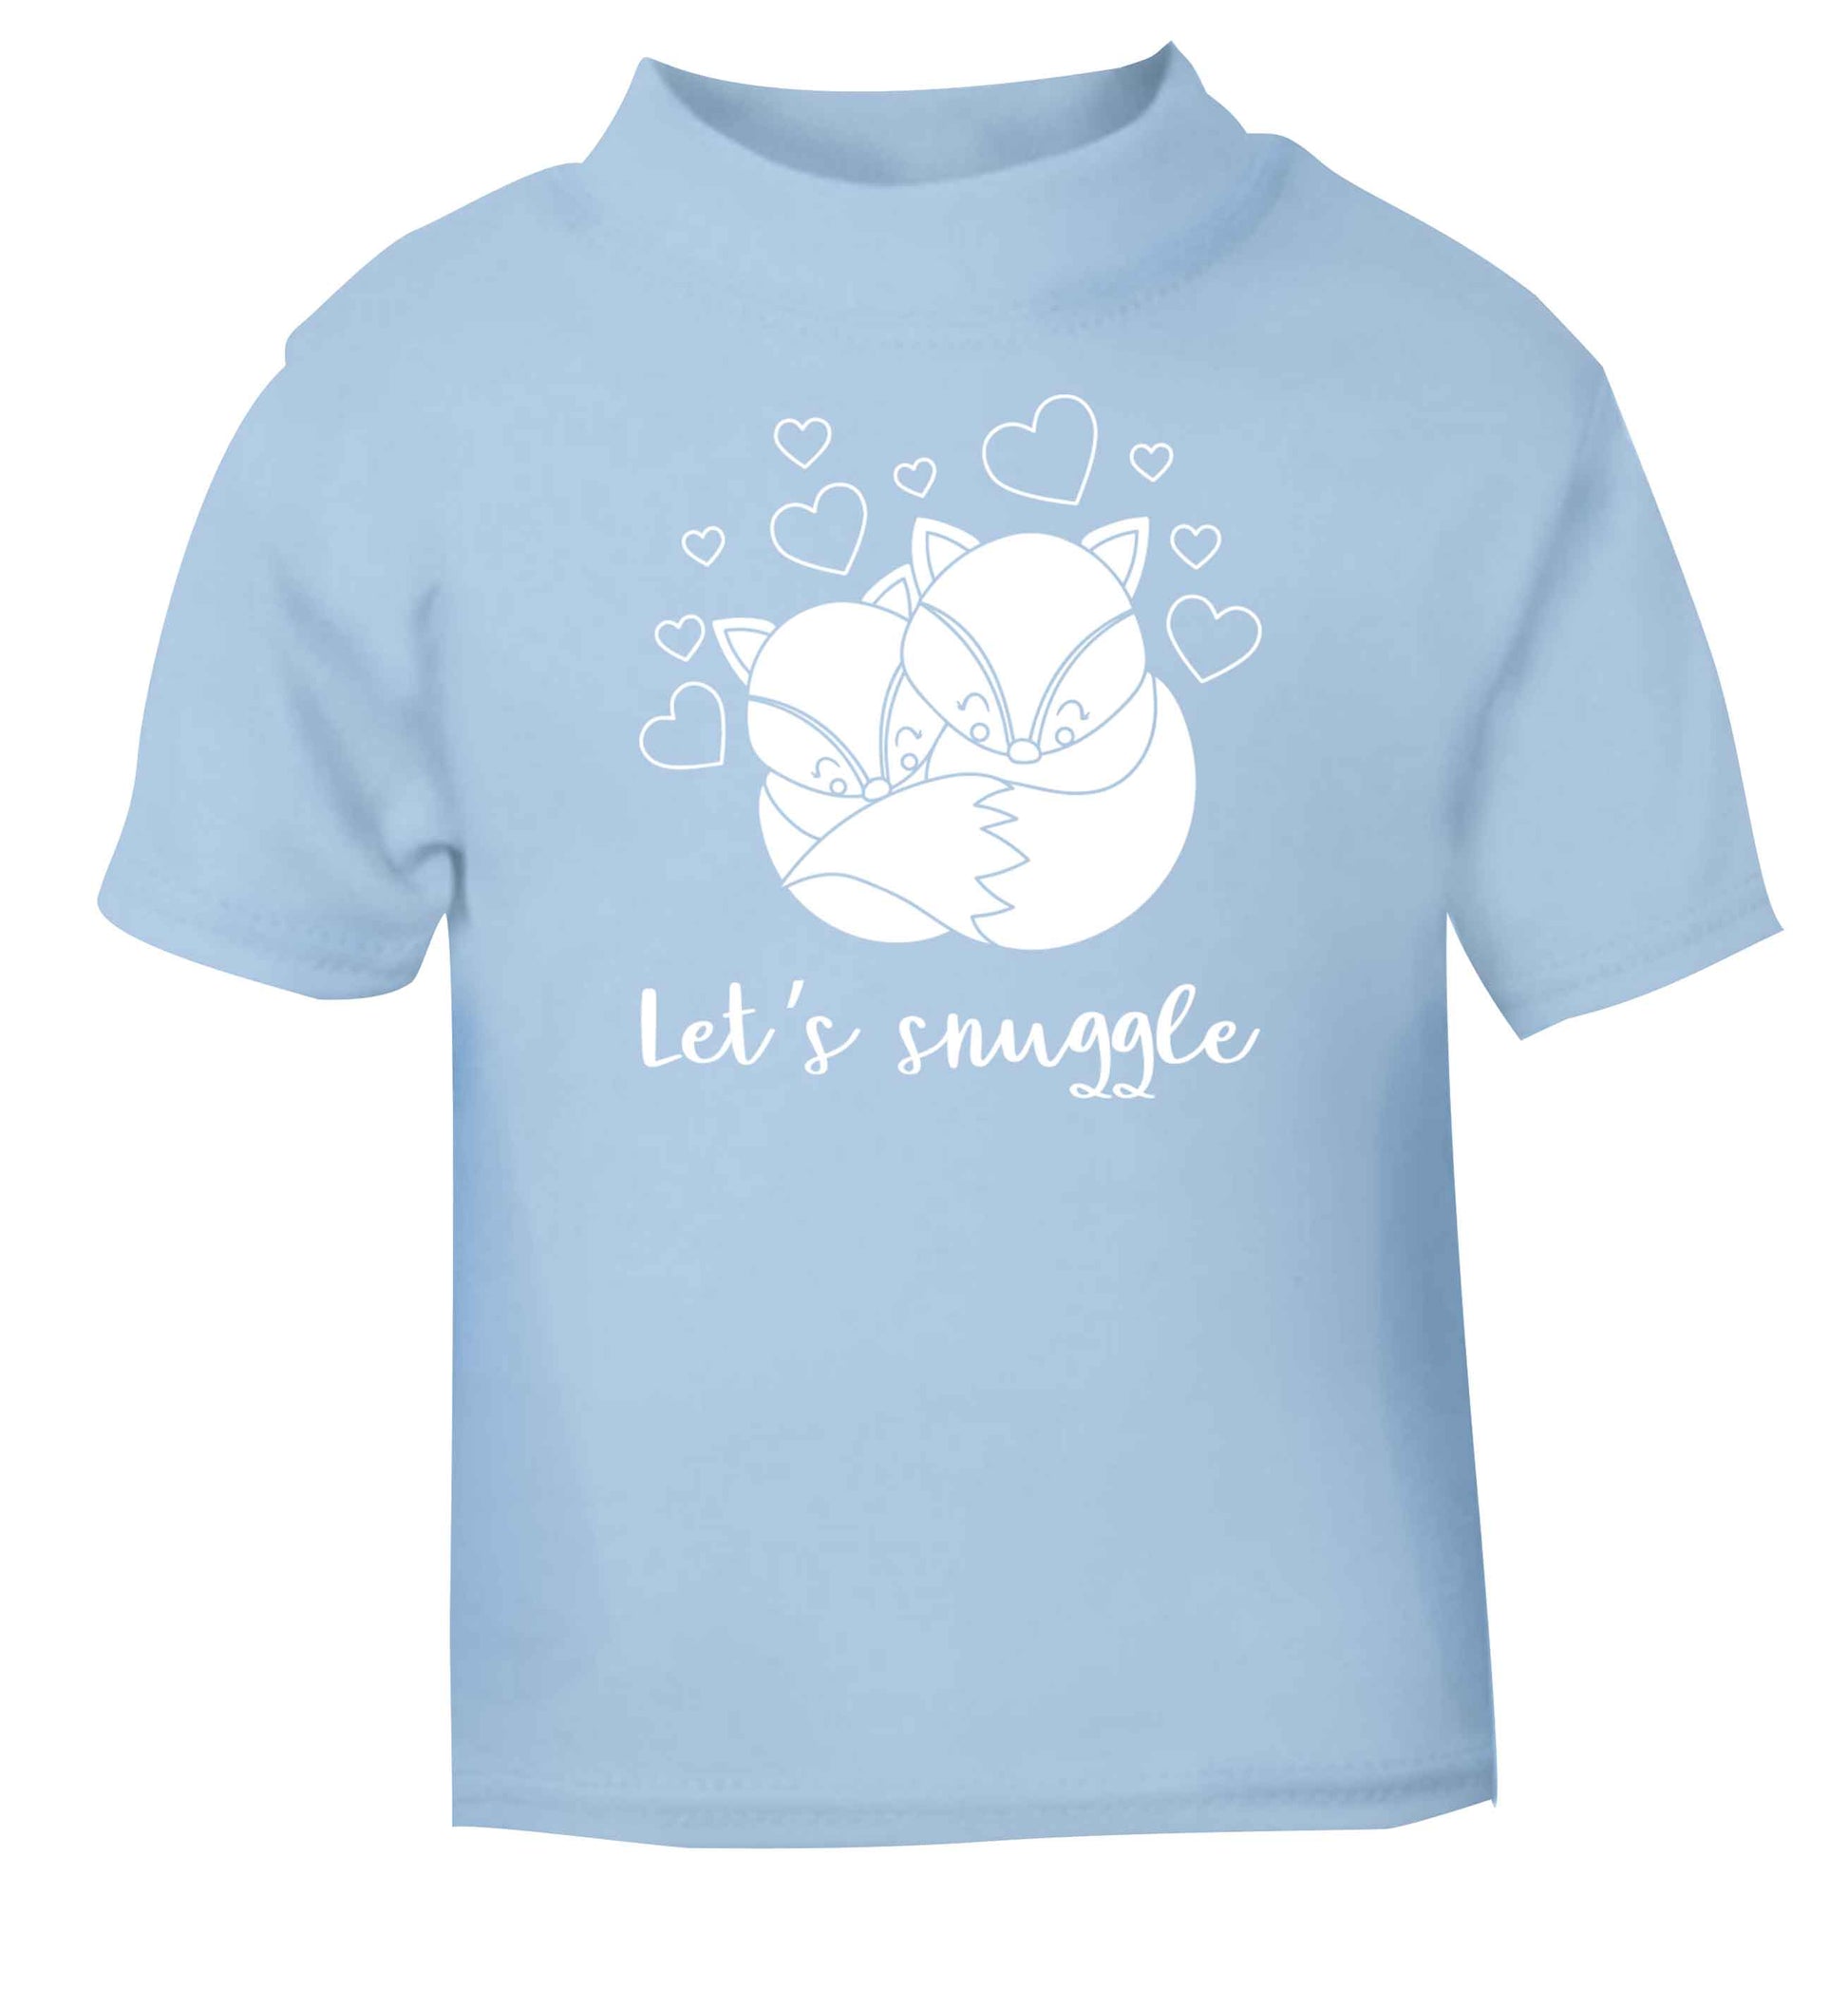 Let's snuggle light blue baby toddler Tshirt 2 Years